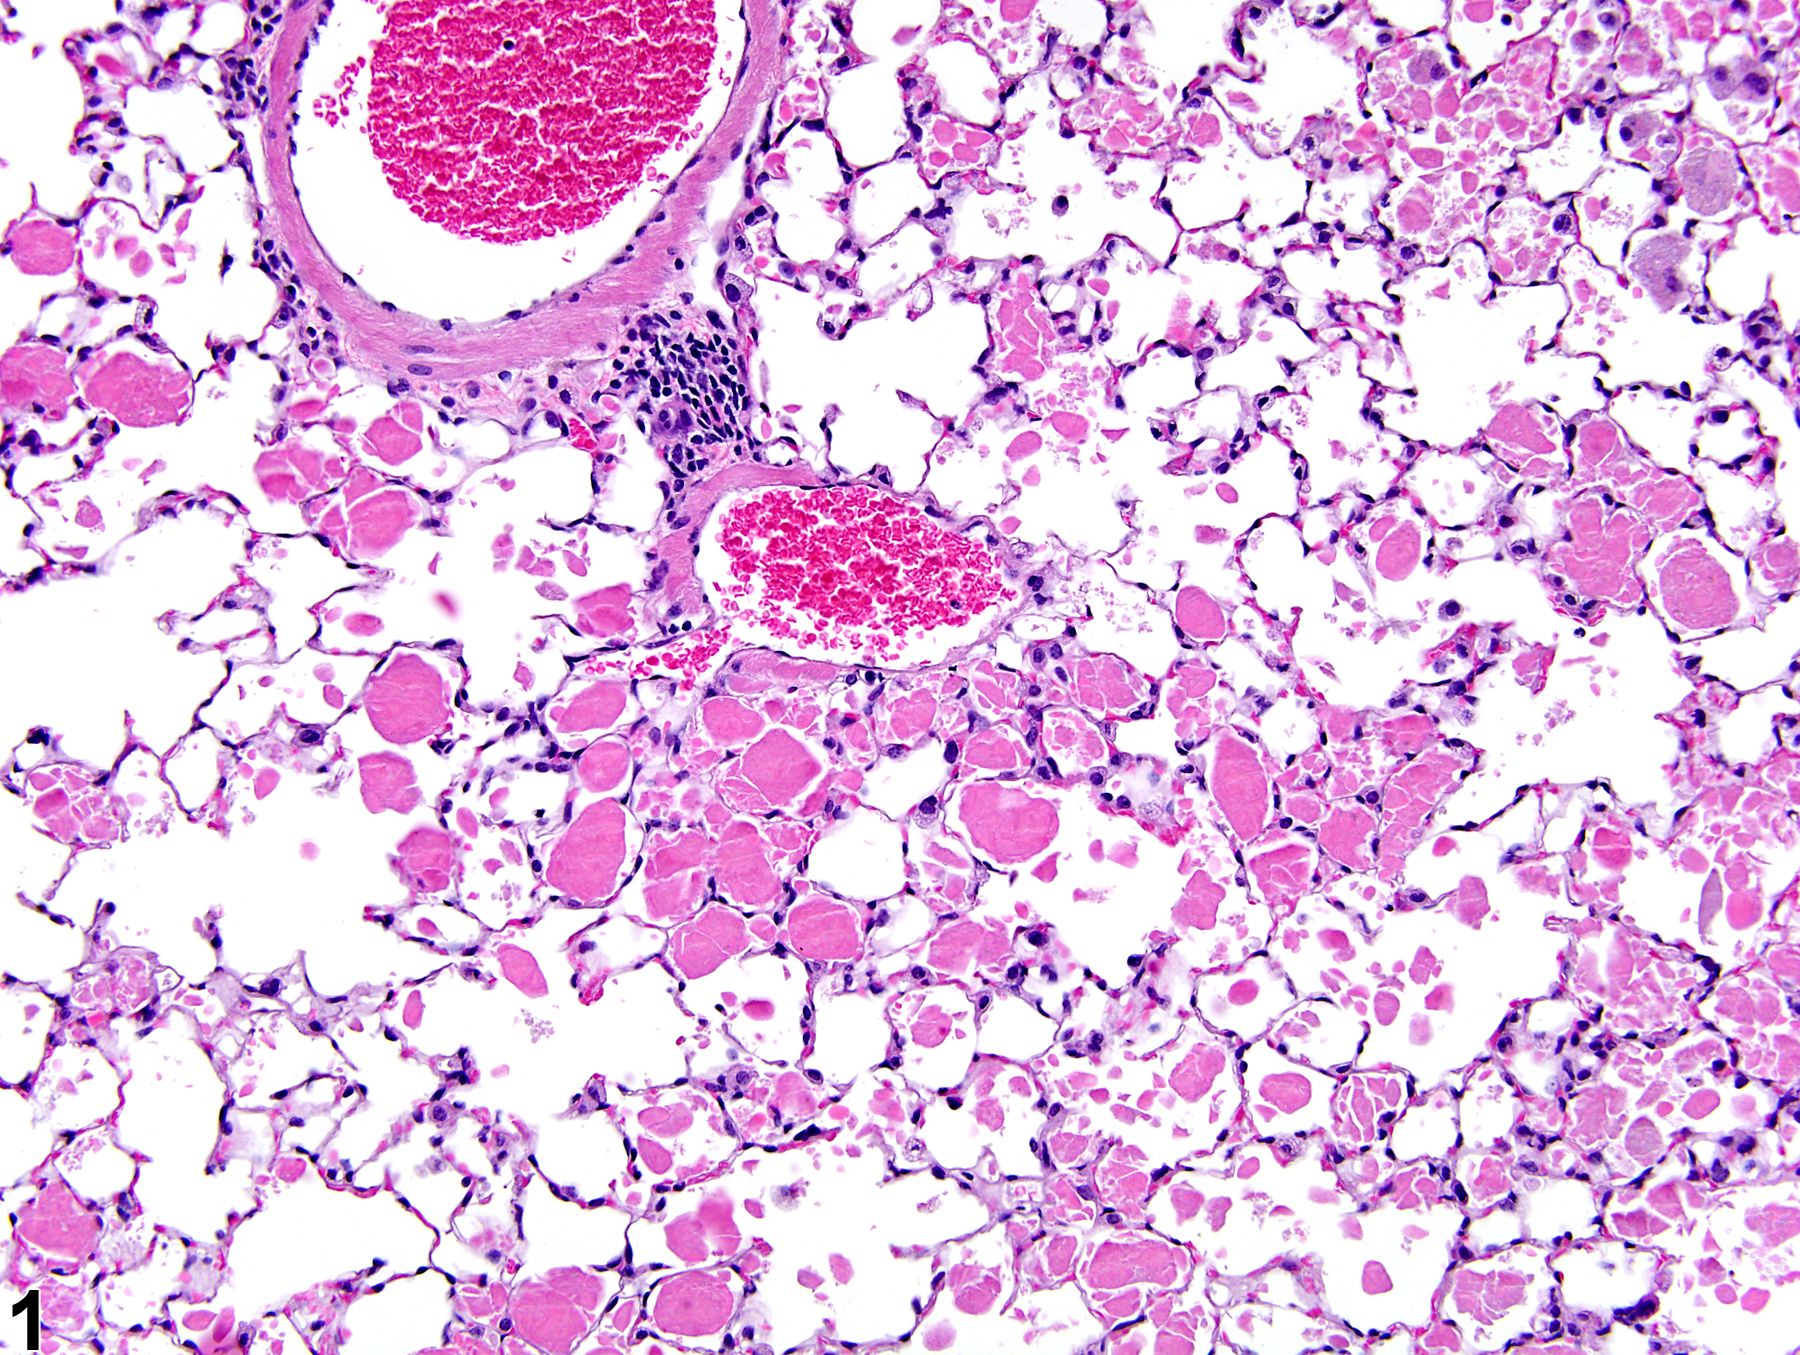 Image of alveolar proteinosis in the lung from a male B6C3F1/N mouse in a chronic study